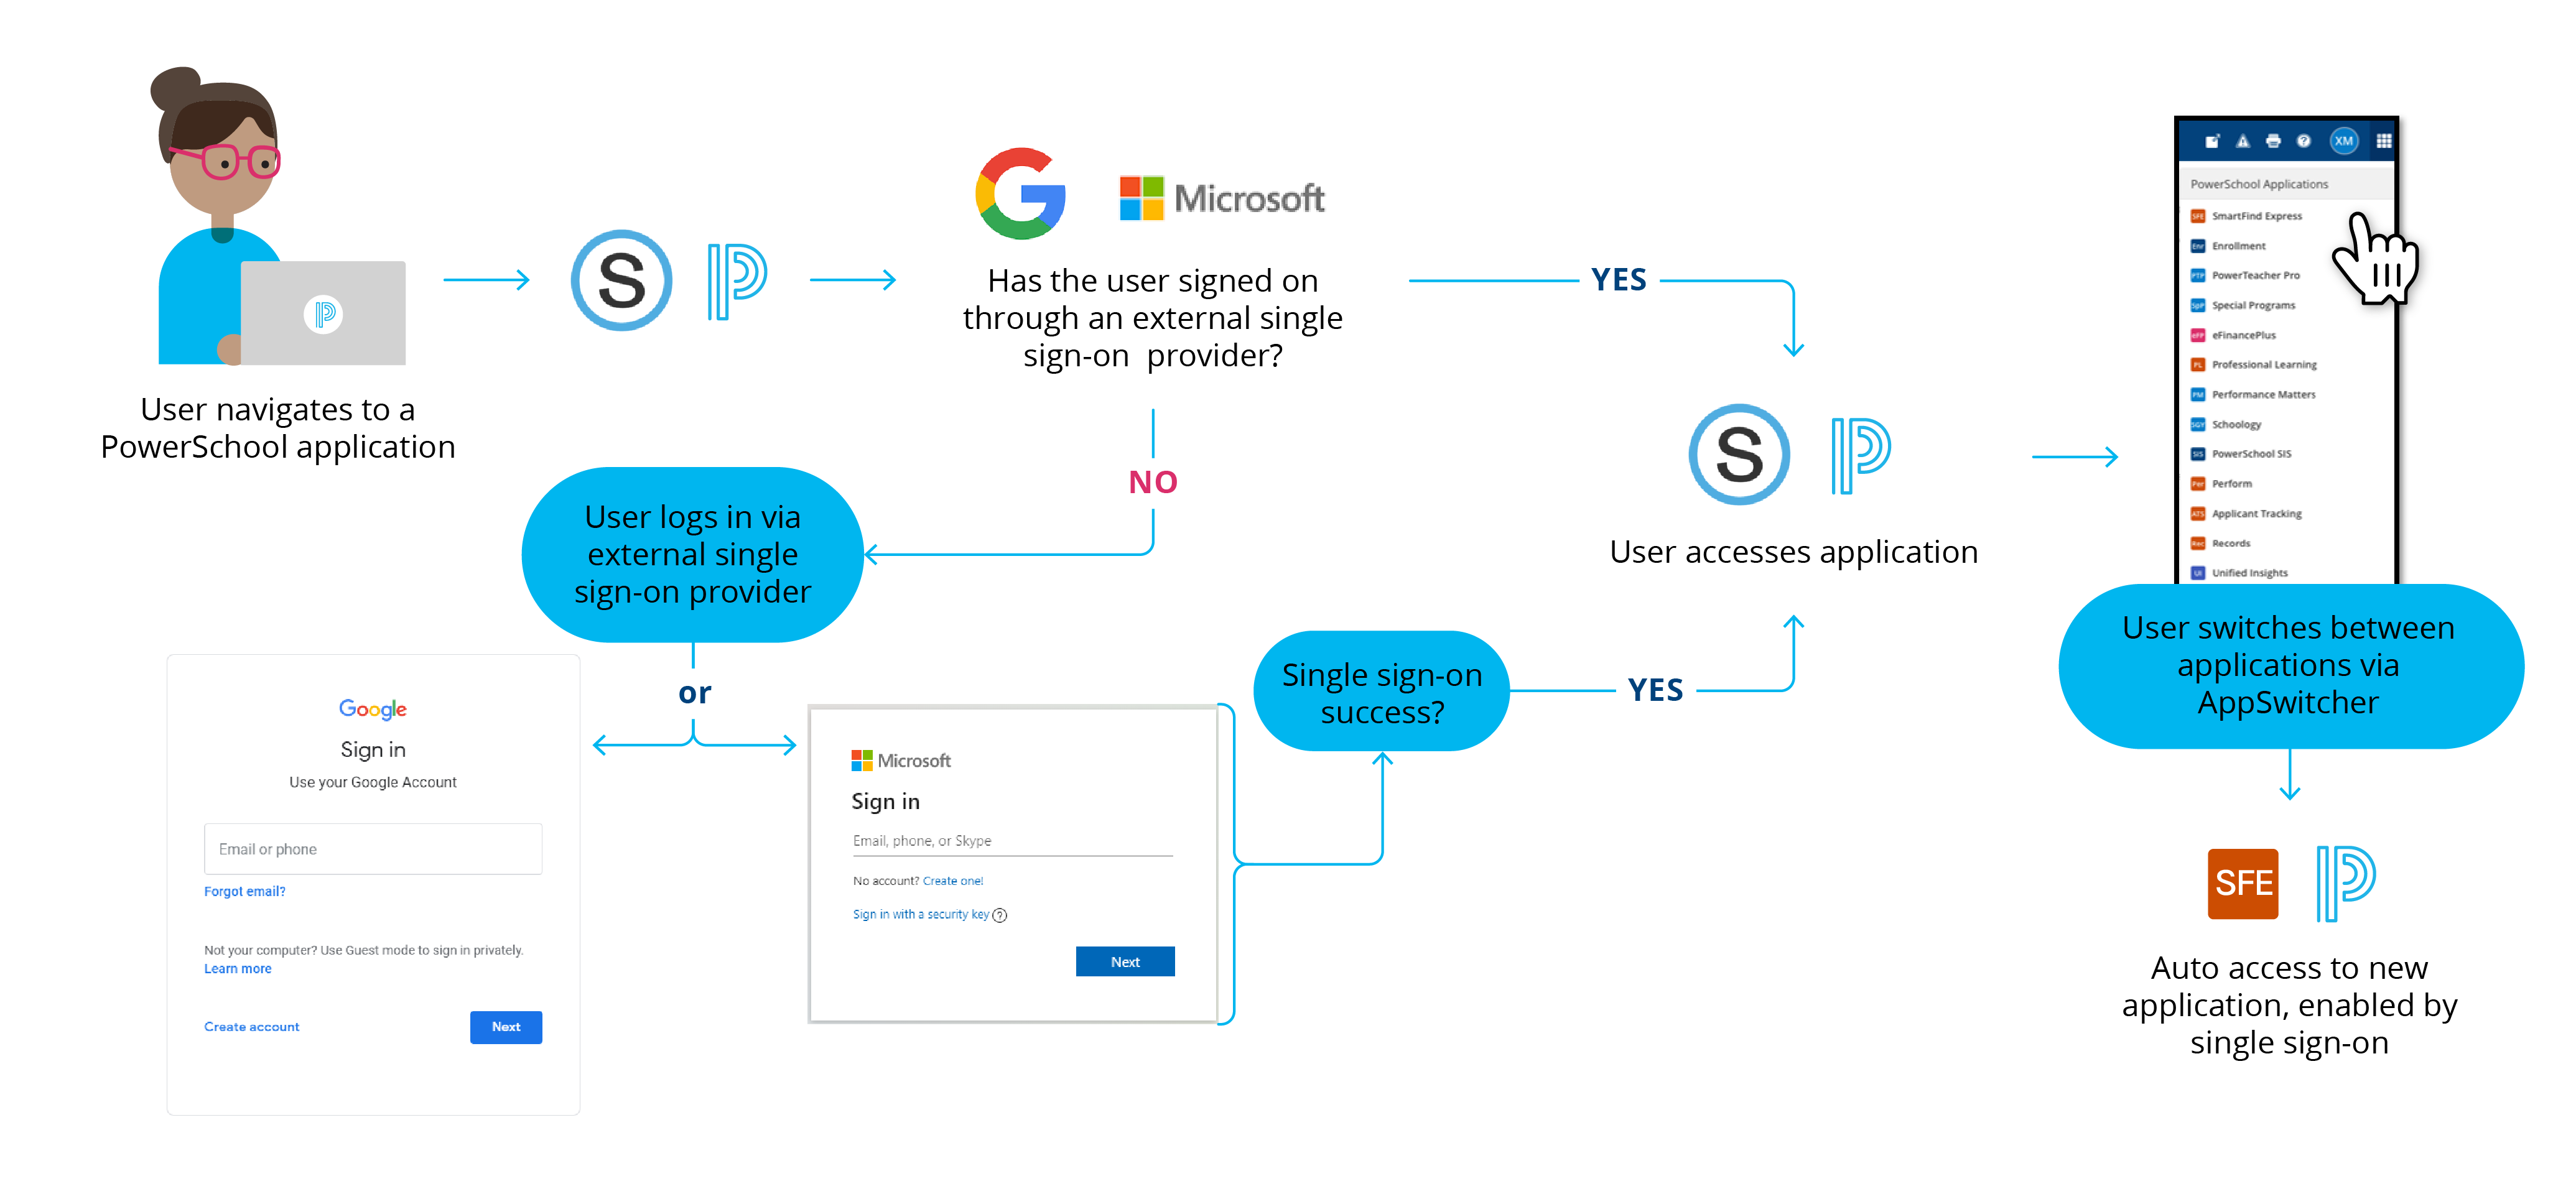 Diagram illustrating how a user is prompted to authenticate with SSO when accessing a PowerSchool application. After successful authentication, the user can then use the AppSwitcher to navigate to other PowerSchool applications without being prompted to sign in.